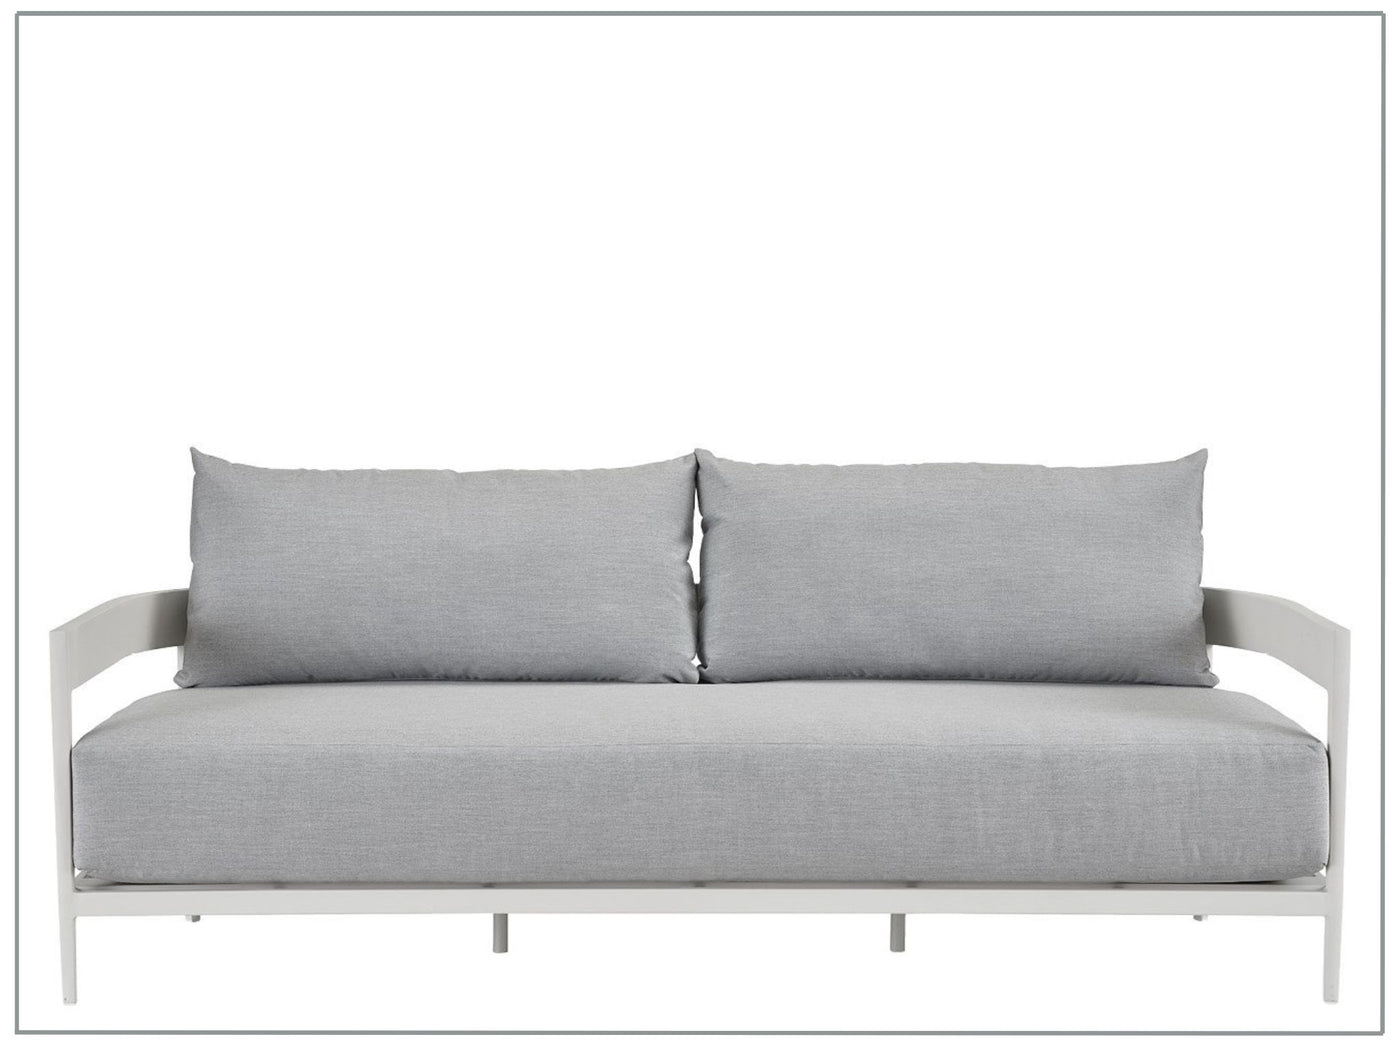 Coastal Living Outdoor South Beach Sofa by Universal Furniture